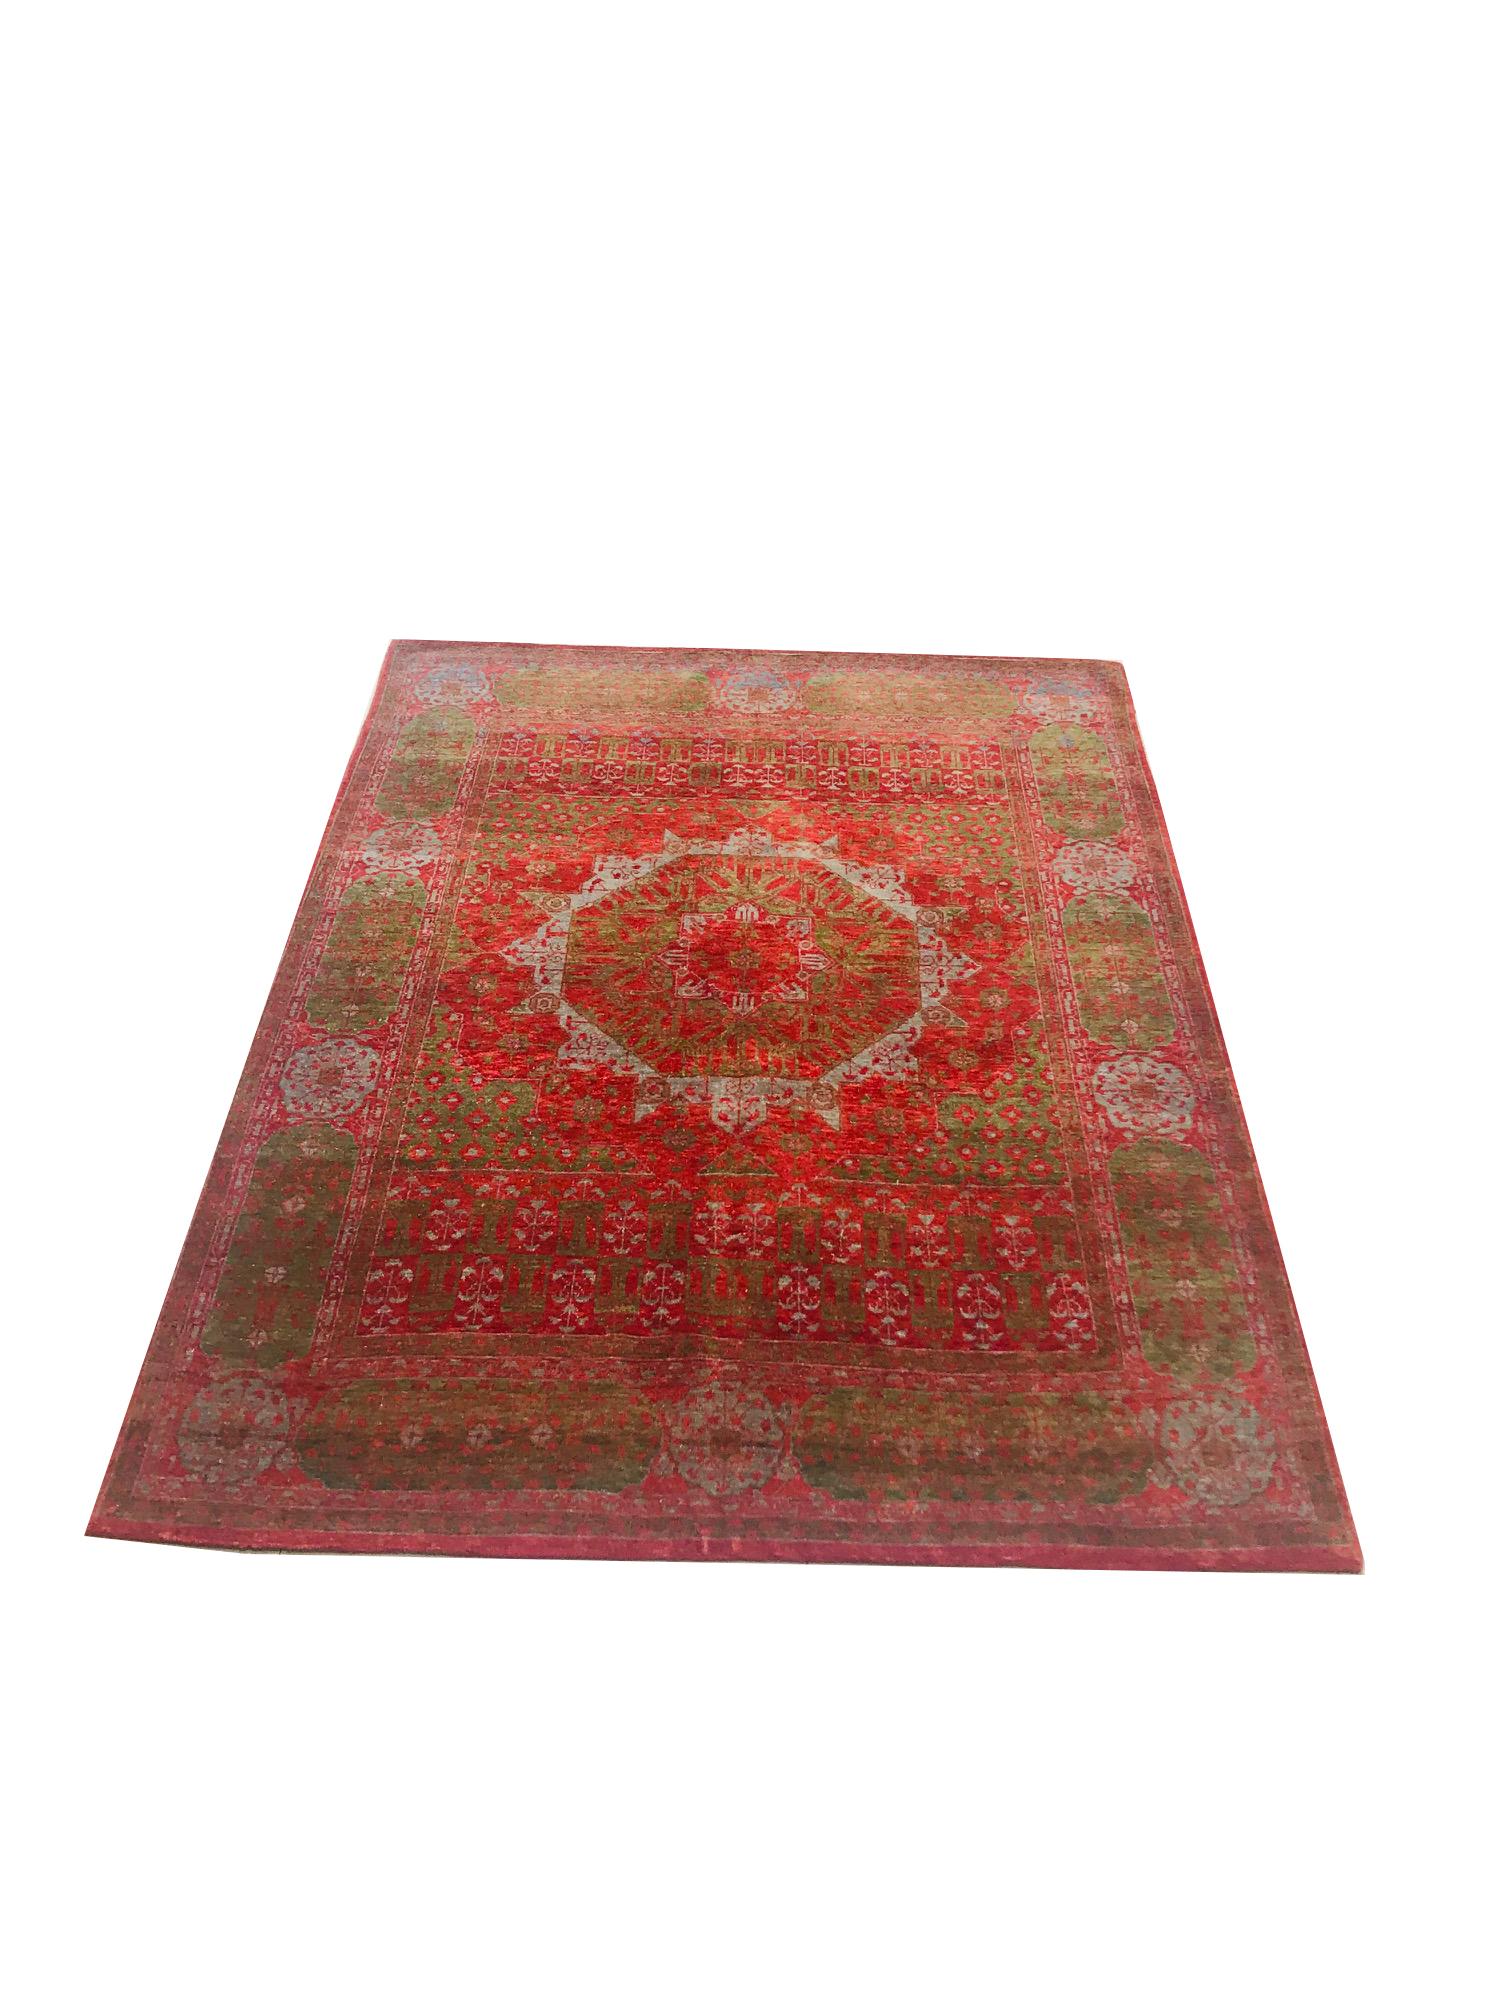 This is an elegant Egyptian rug, woven by hand with wool, made in circa 1950.

It is kept in perfect condition. It uses a combination of strong-colored flowers such as red and green that support the sophisticated central floral medallion.
This